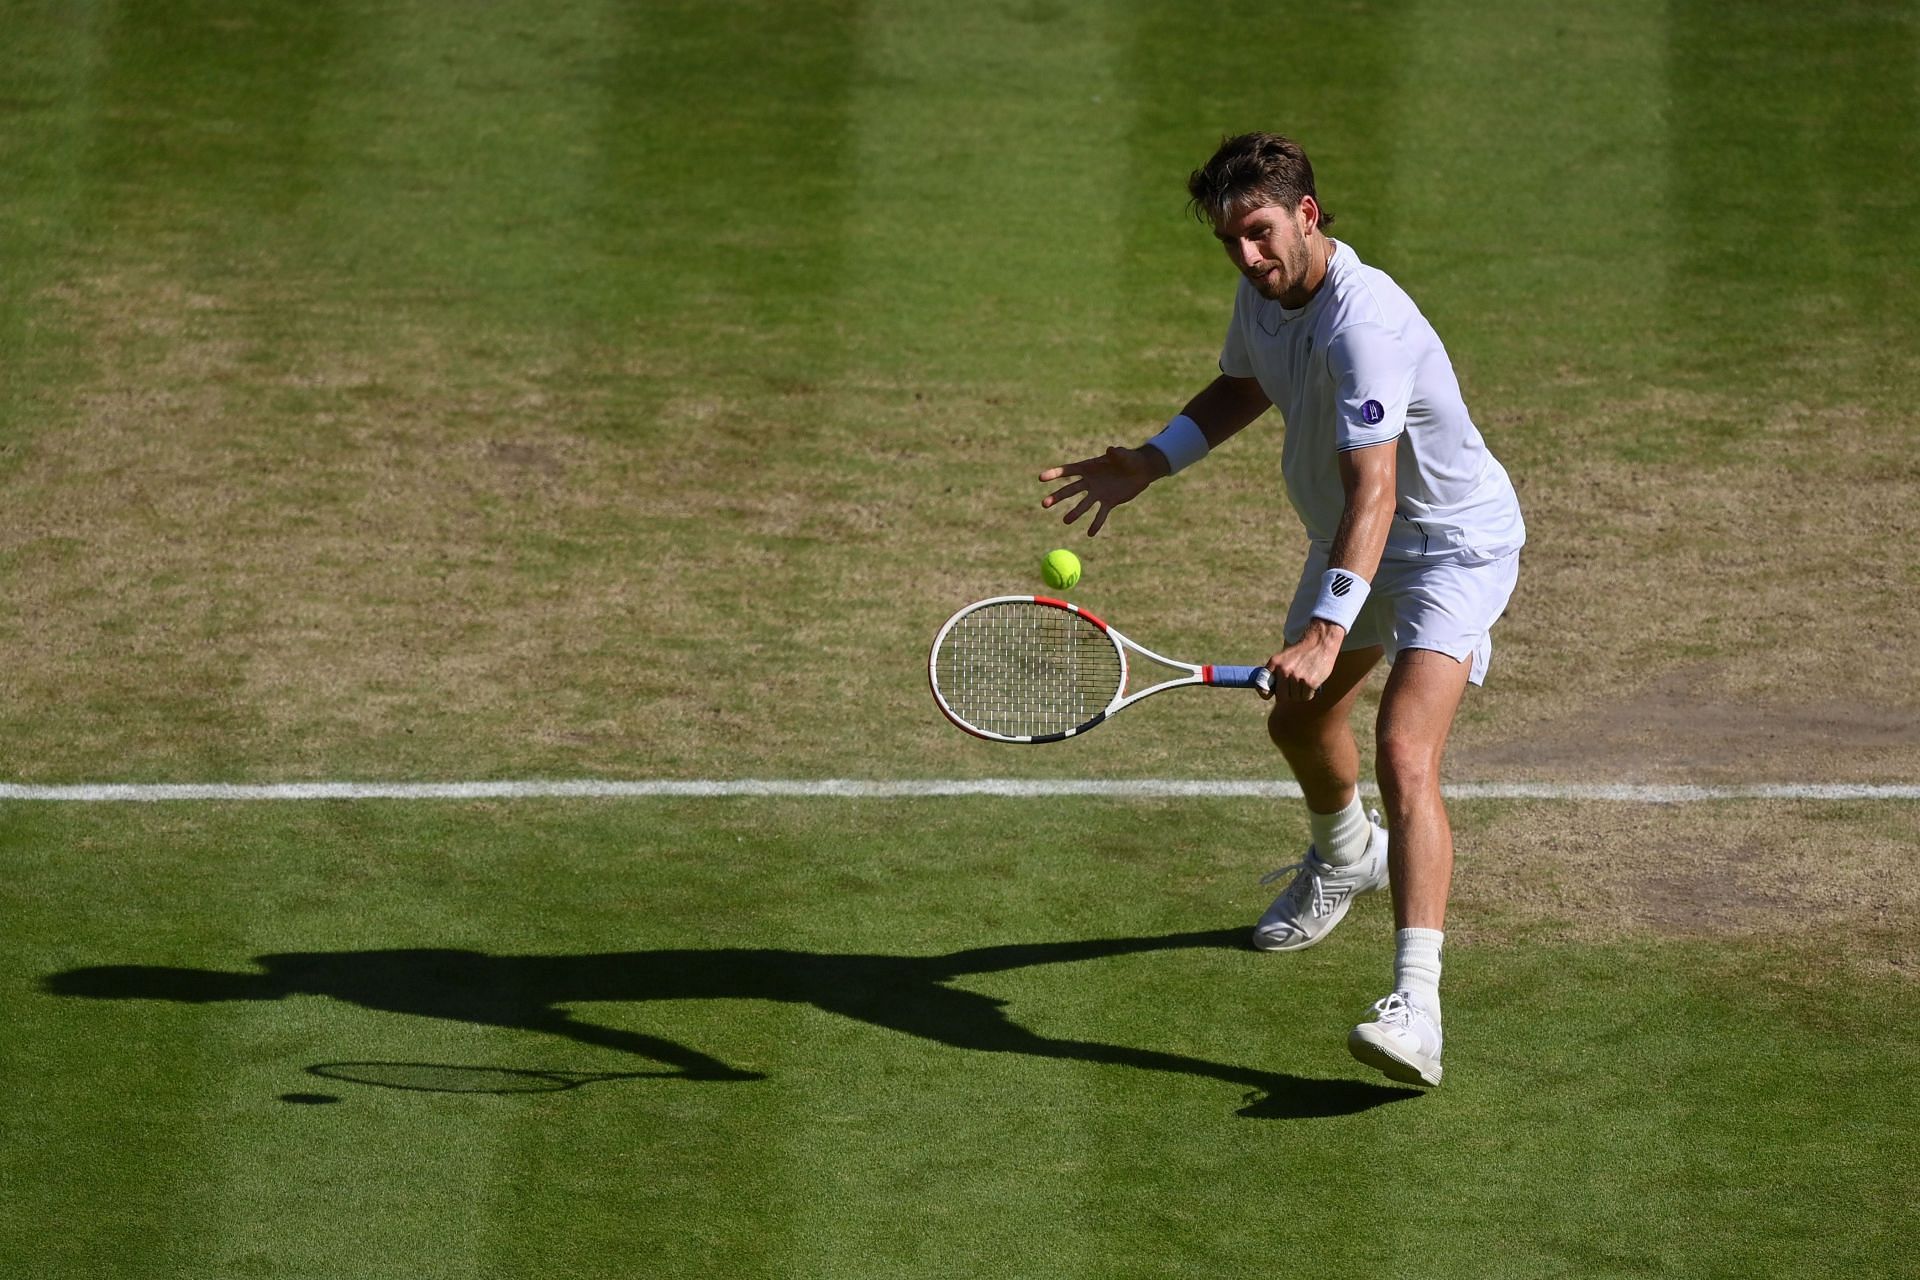 Cameron Norrie fell short in his first Major semifinal on Friday.